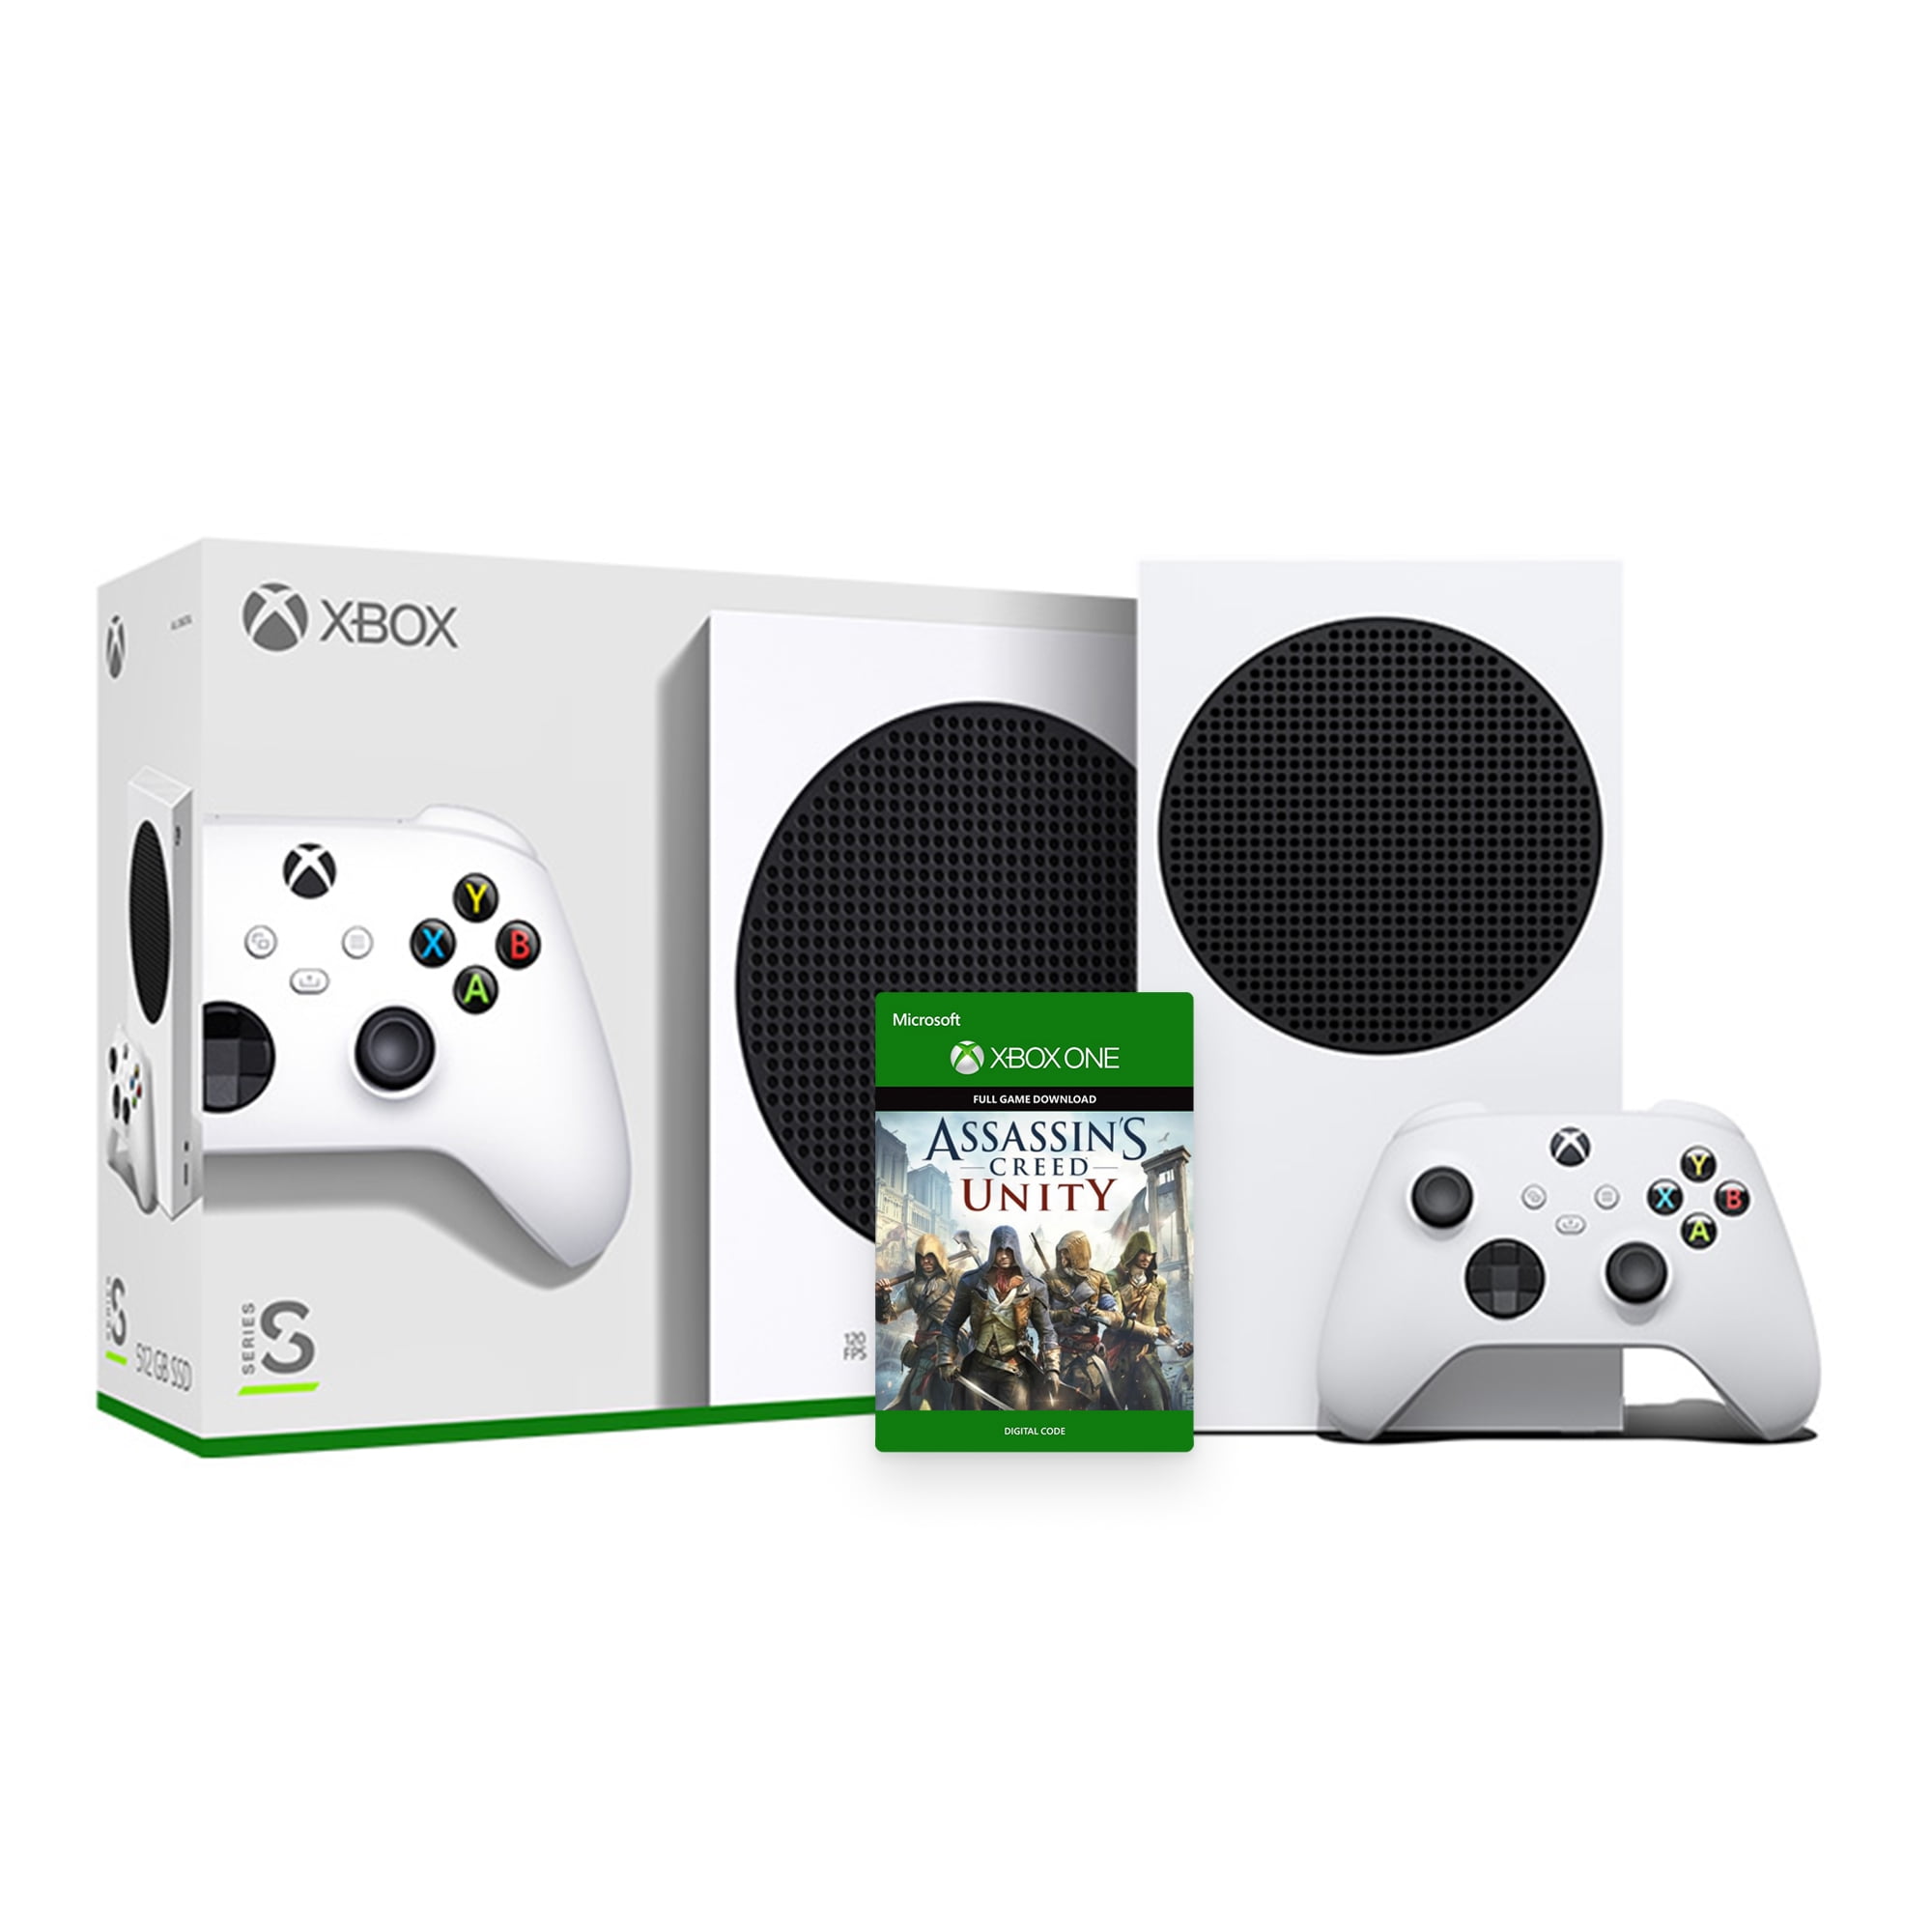 Xbox One Assassin's Creed Unity Bundle available for $349 and free game,  for today only - Neowin